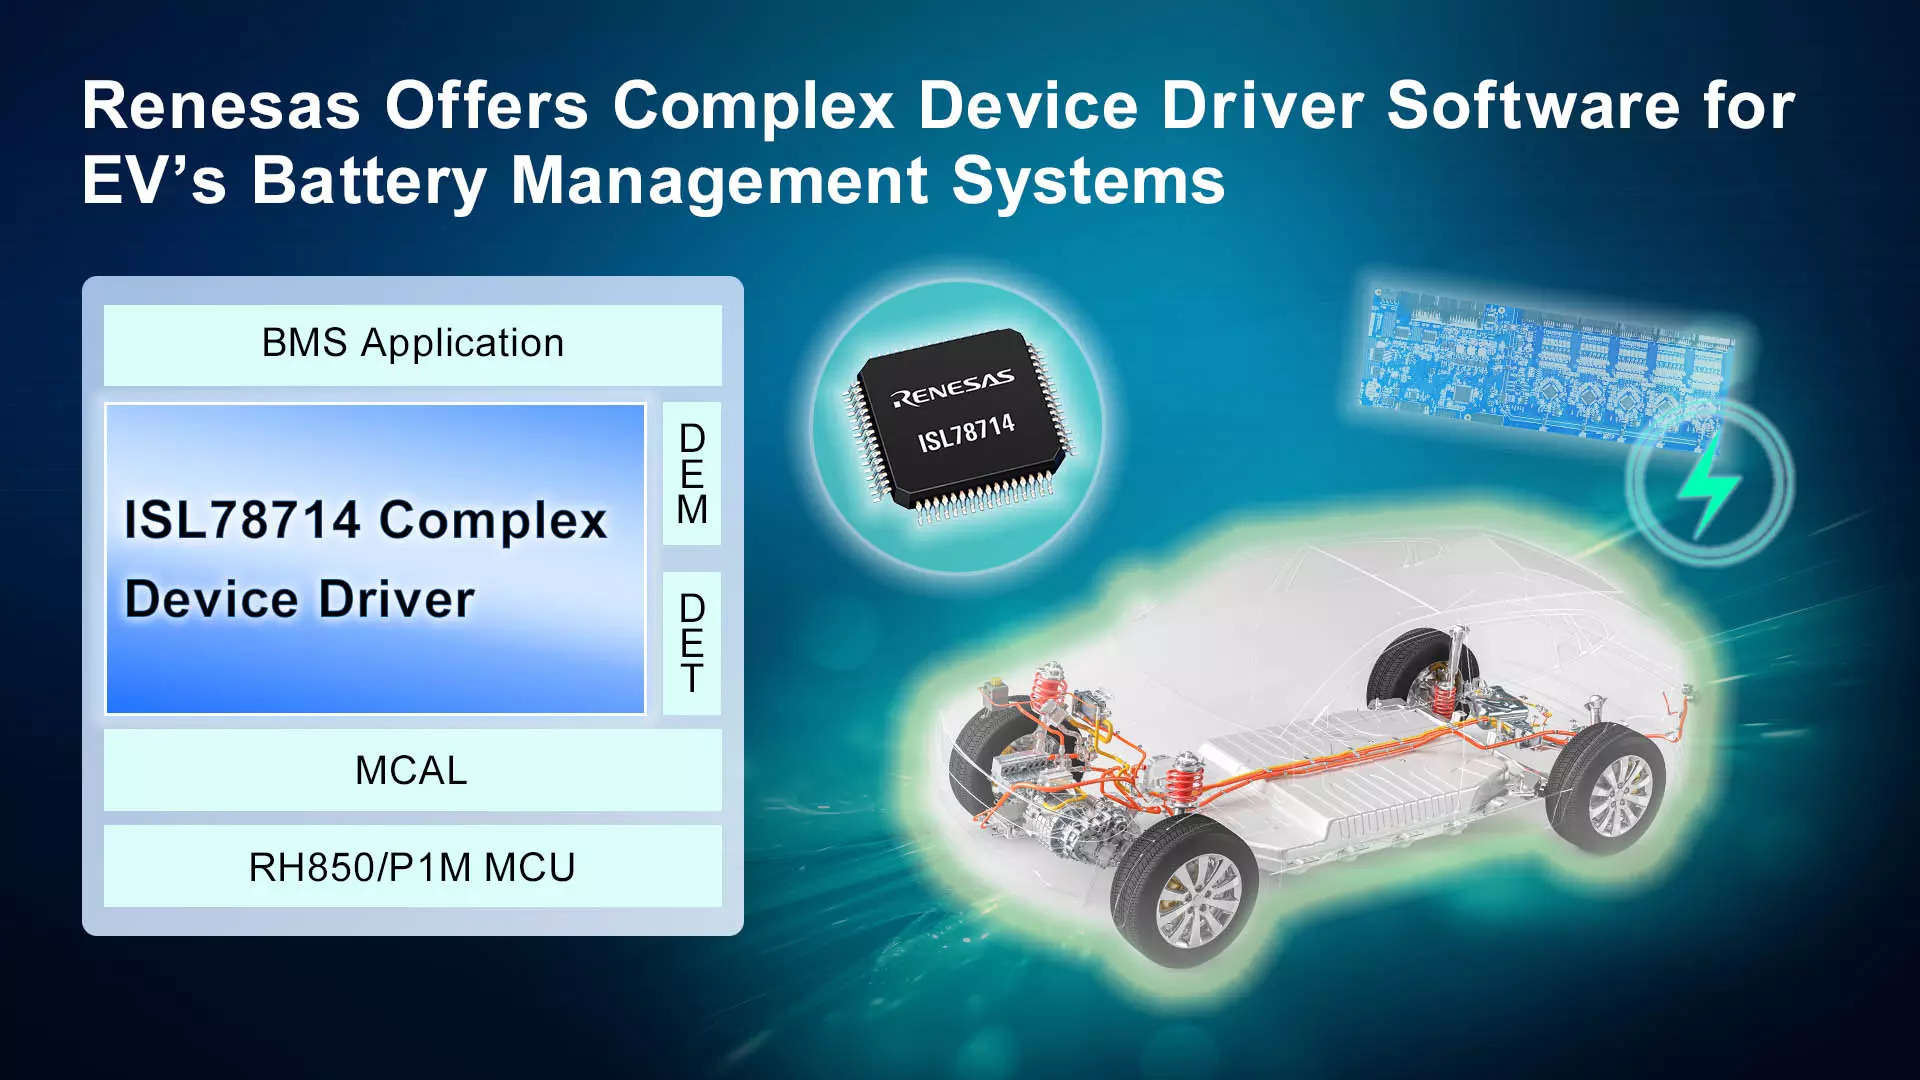 Renesas introduces CDD software to ease the development of BMS for EVs